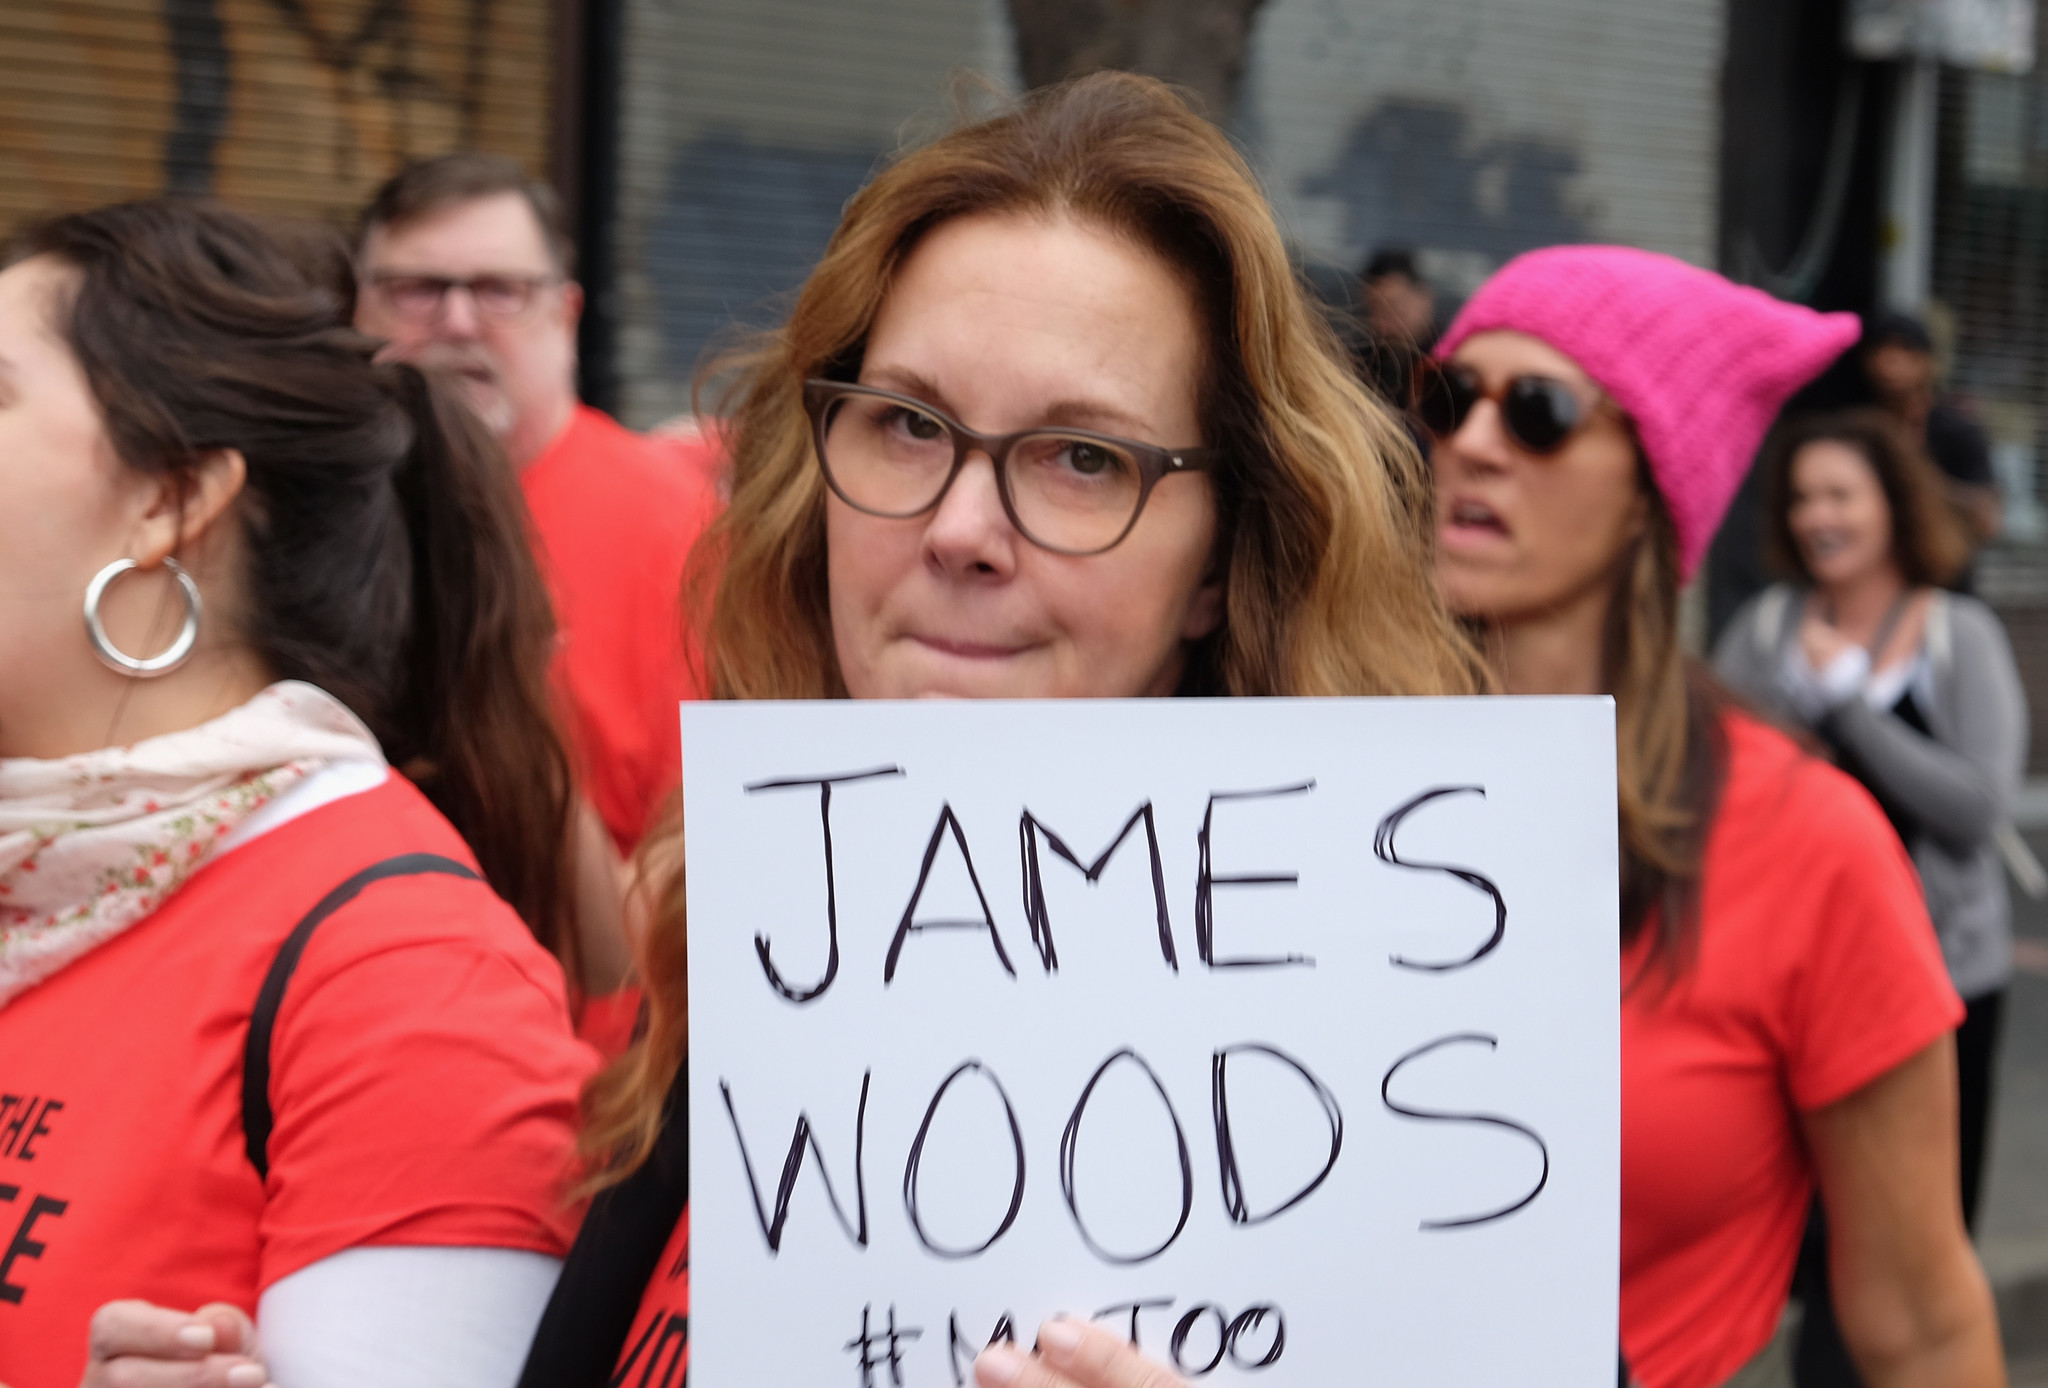 Elizabeth Perkins with sign identifying James Woods